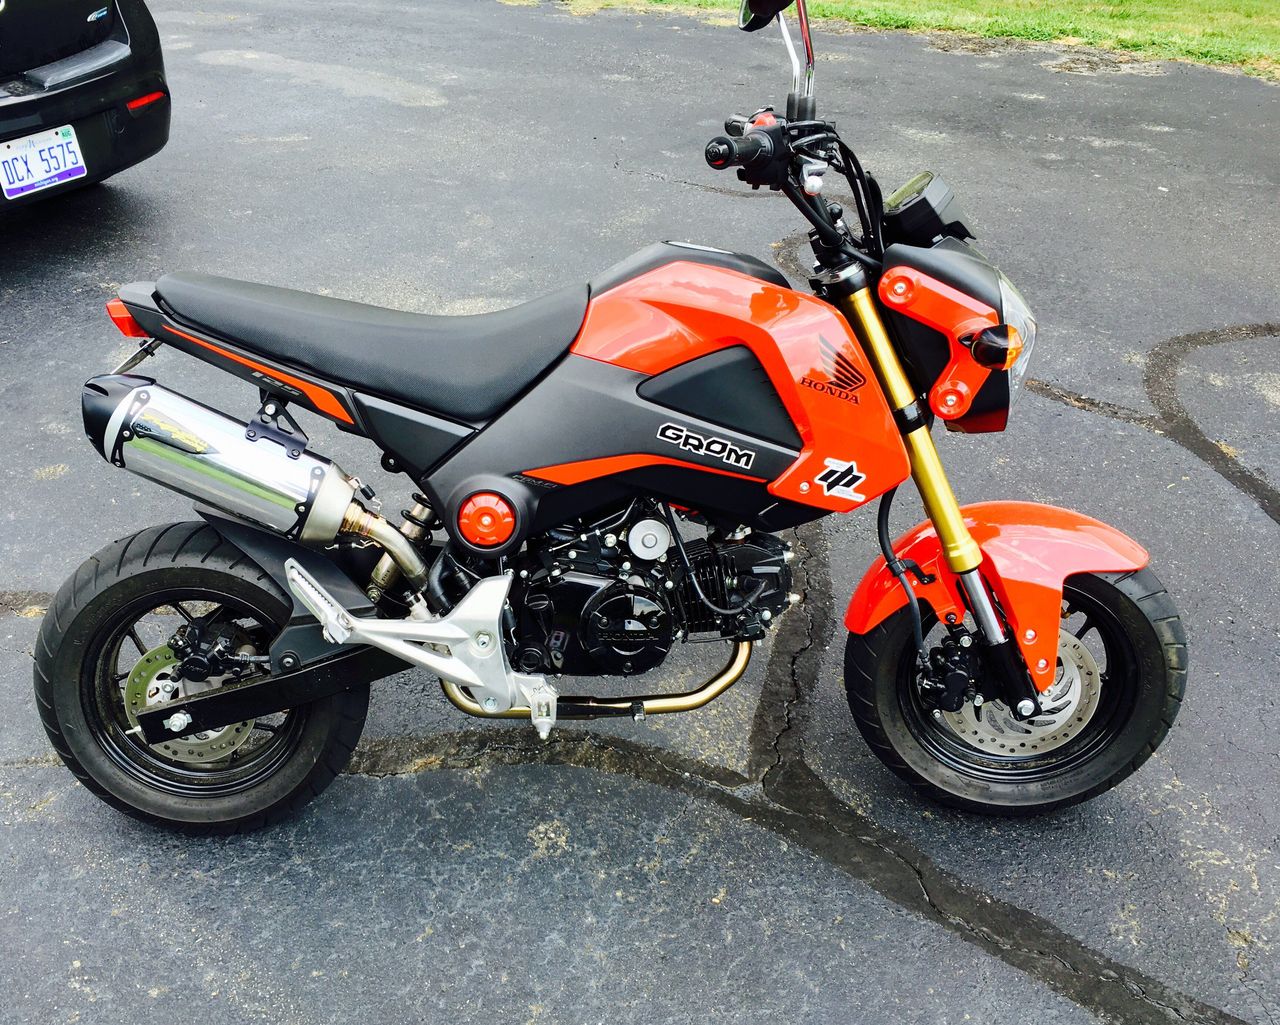 The Grom!